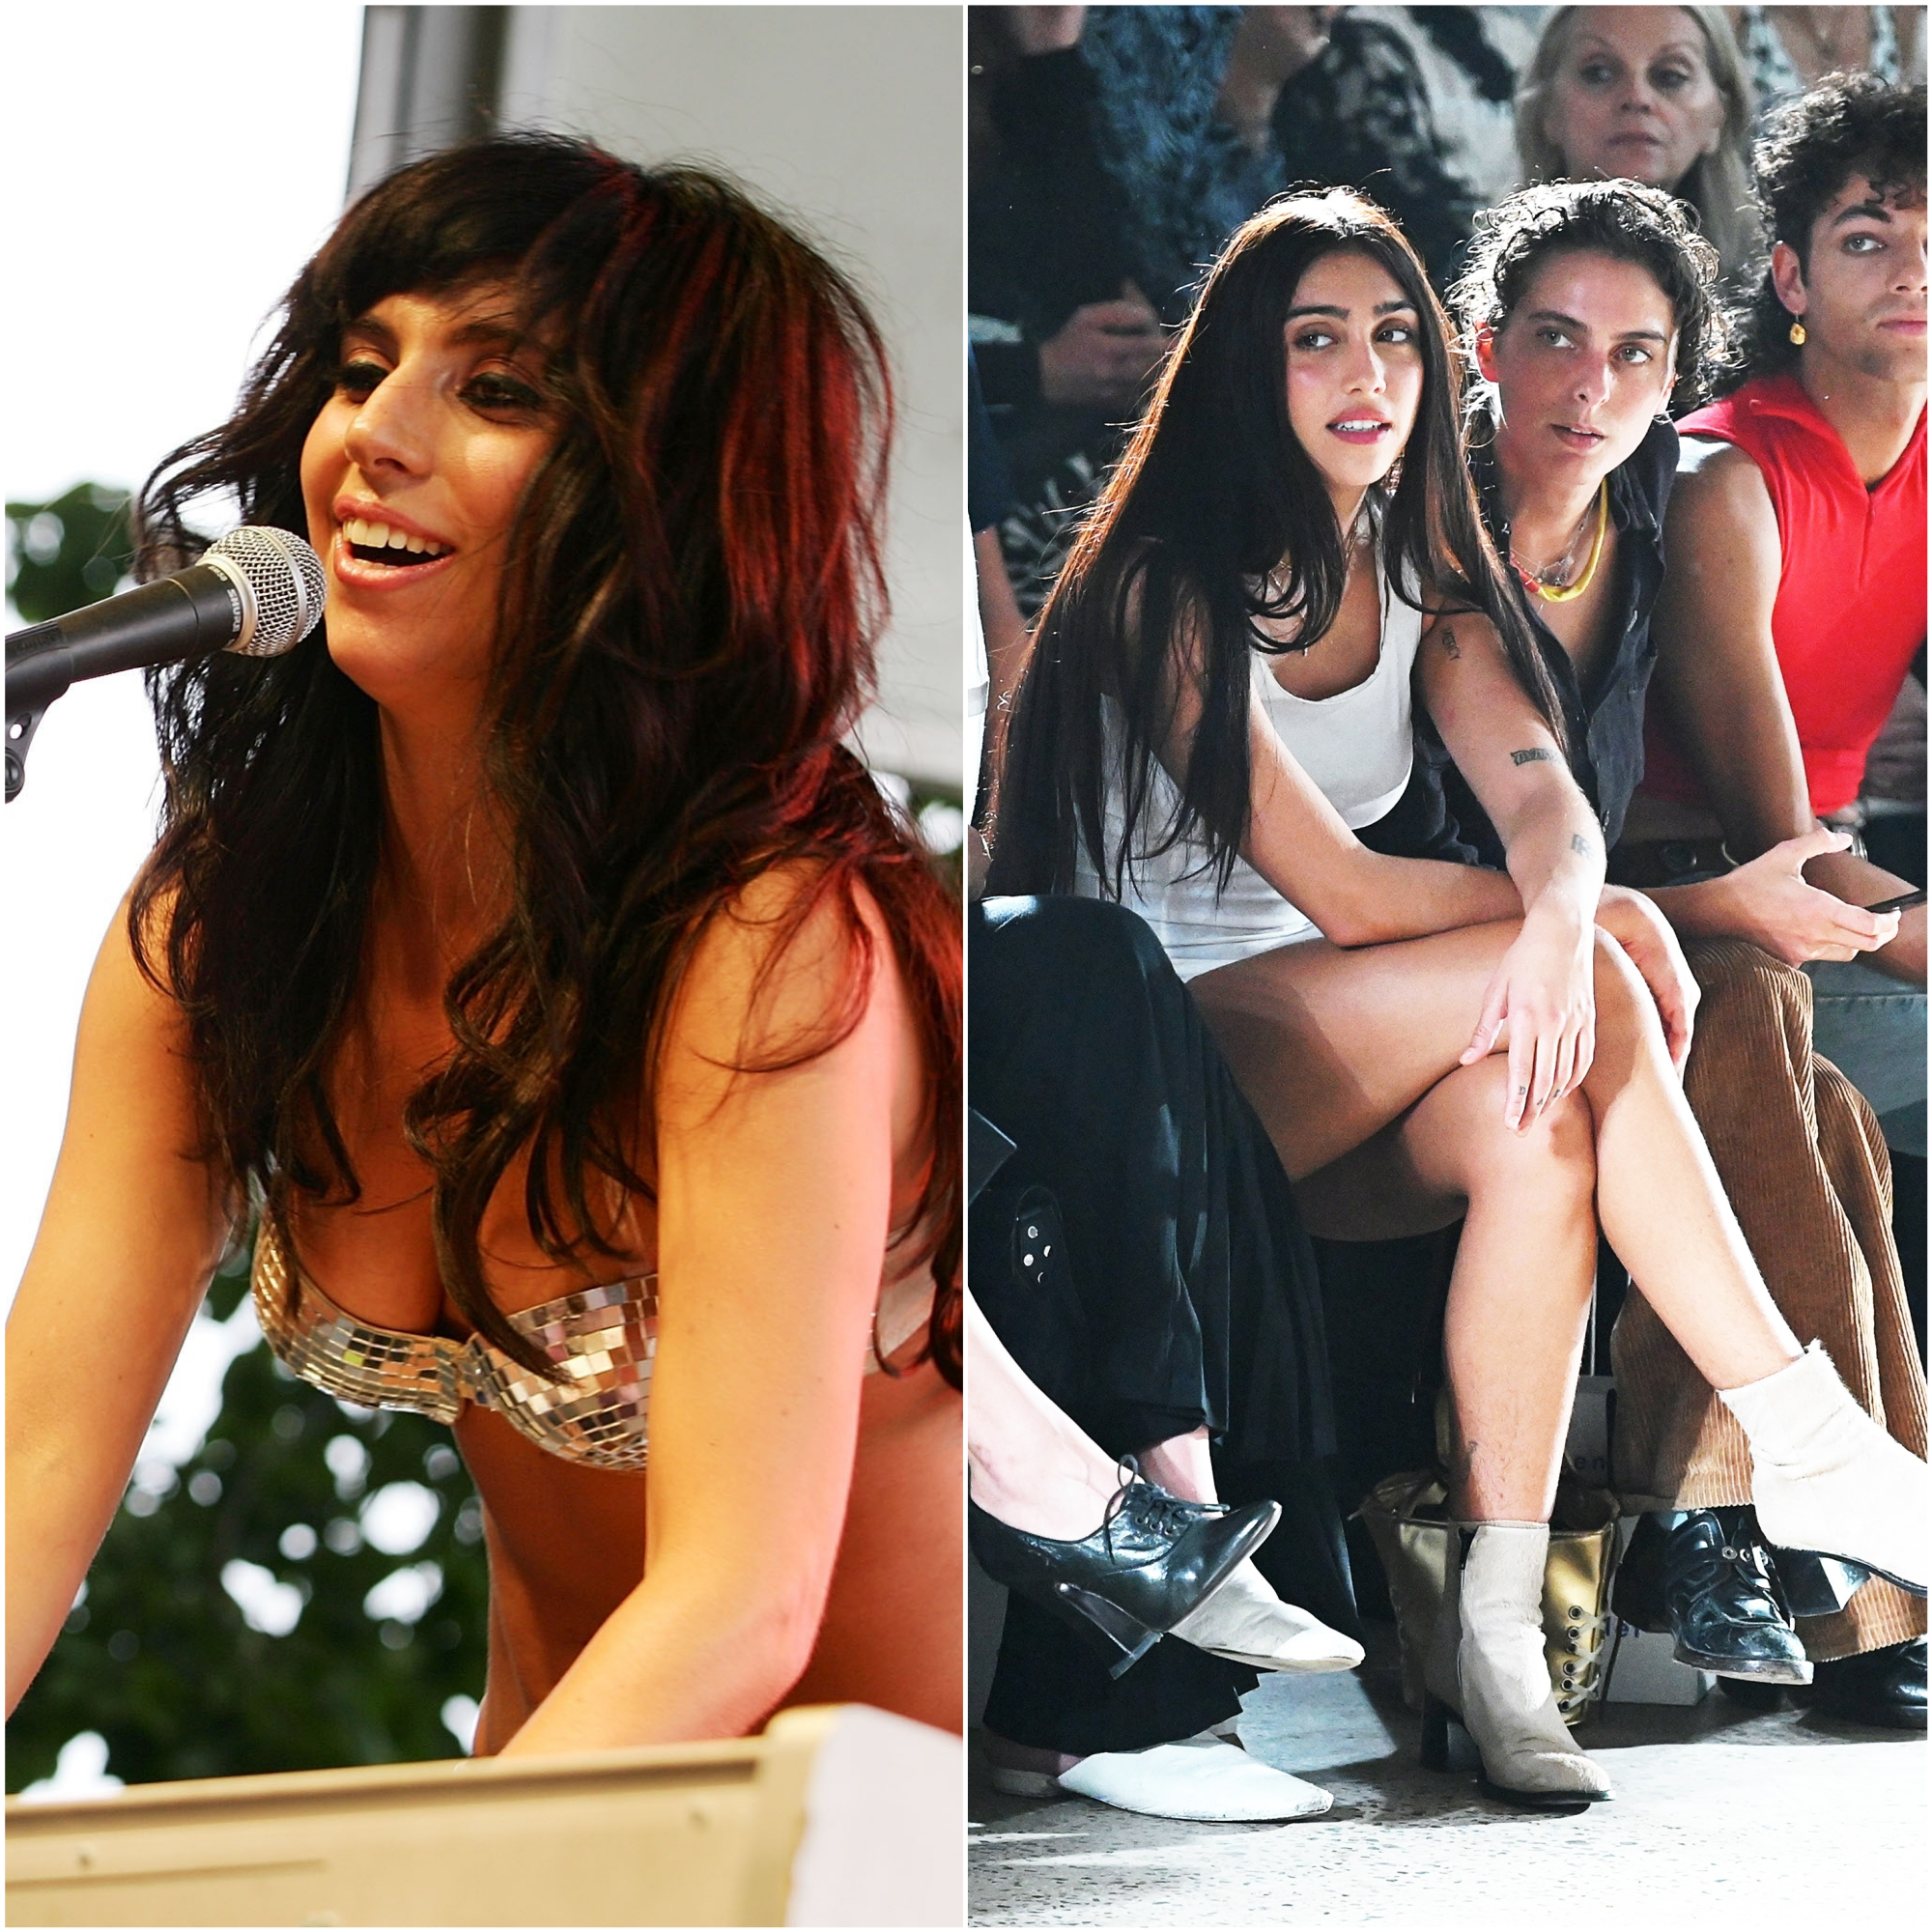 Lourdes Leon Is Being Compared To Lady Gaga In This Photo